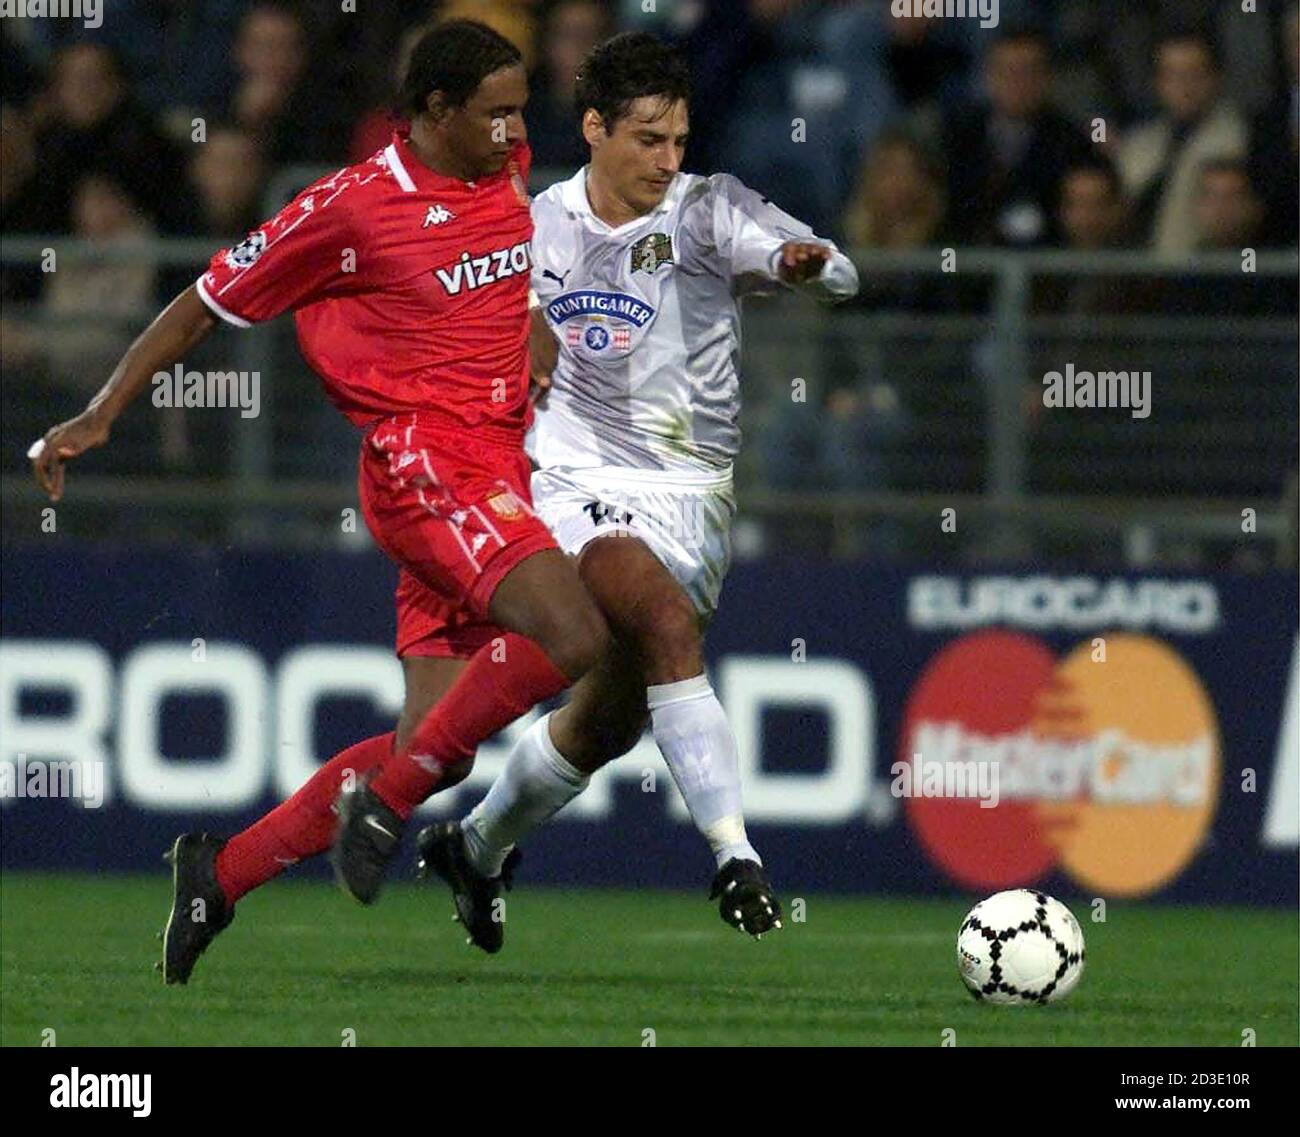 Ivica Vastic (R) of Sturm Graz fights for the ball with Ousmane Dabo (L) of  AS. Monaco during their Champions League Group D soccer match in Graz  October 17, 2000. LF/CLH Stock